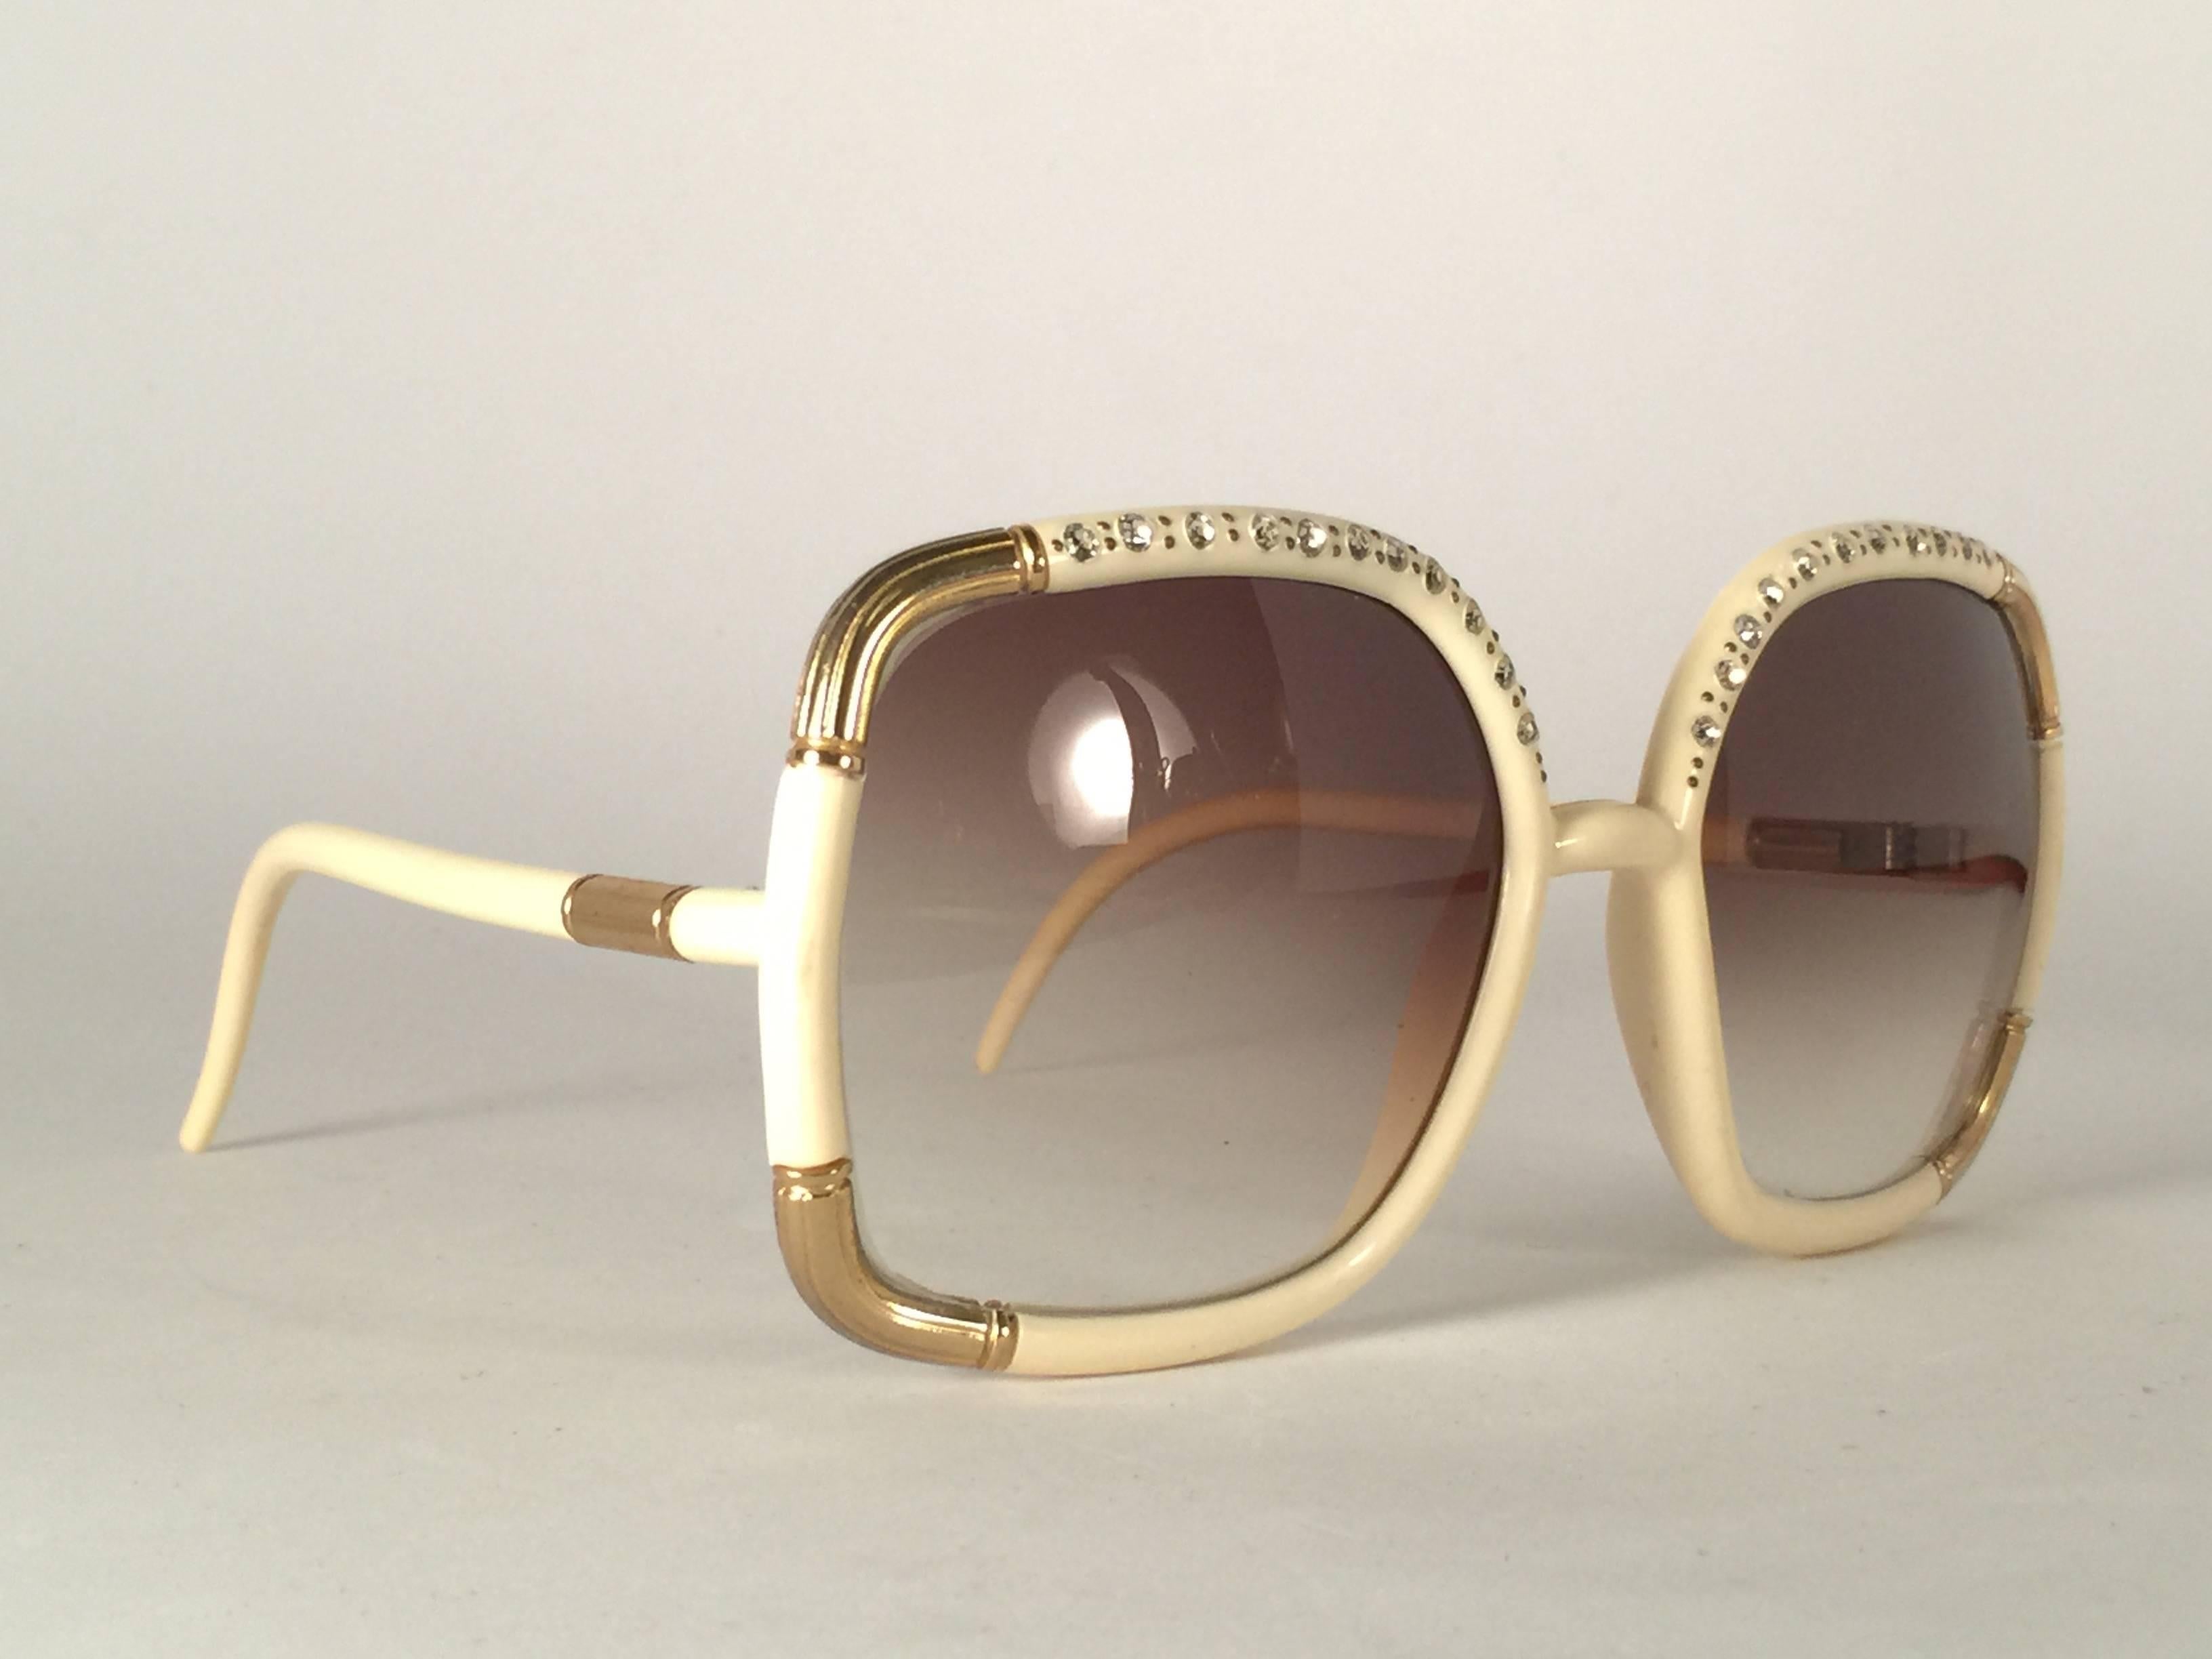 New Vintage Ted Lapidus Ivory and strass details frame with spotless lenses. 

Please consider that this item its nearly 50 years old and could show minor sign of wear or discolouration due to storage. 

Made in Paris. Produced and design in 1970's.